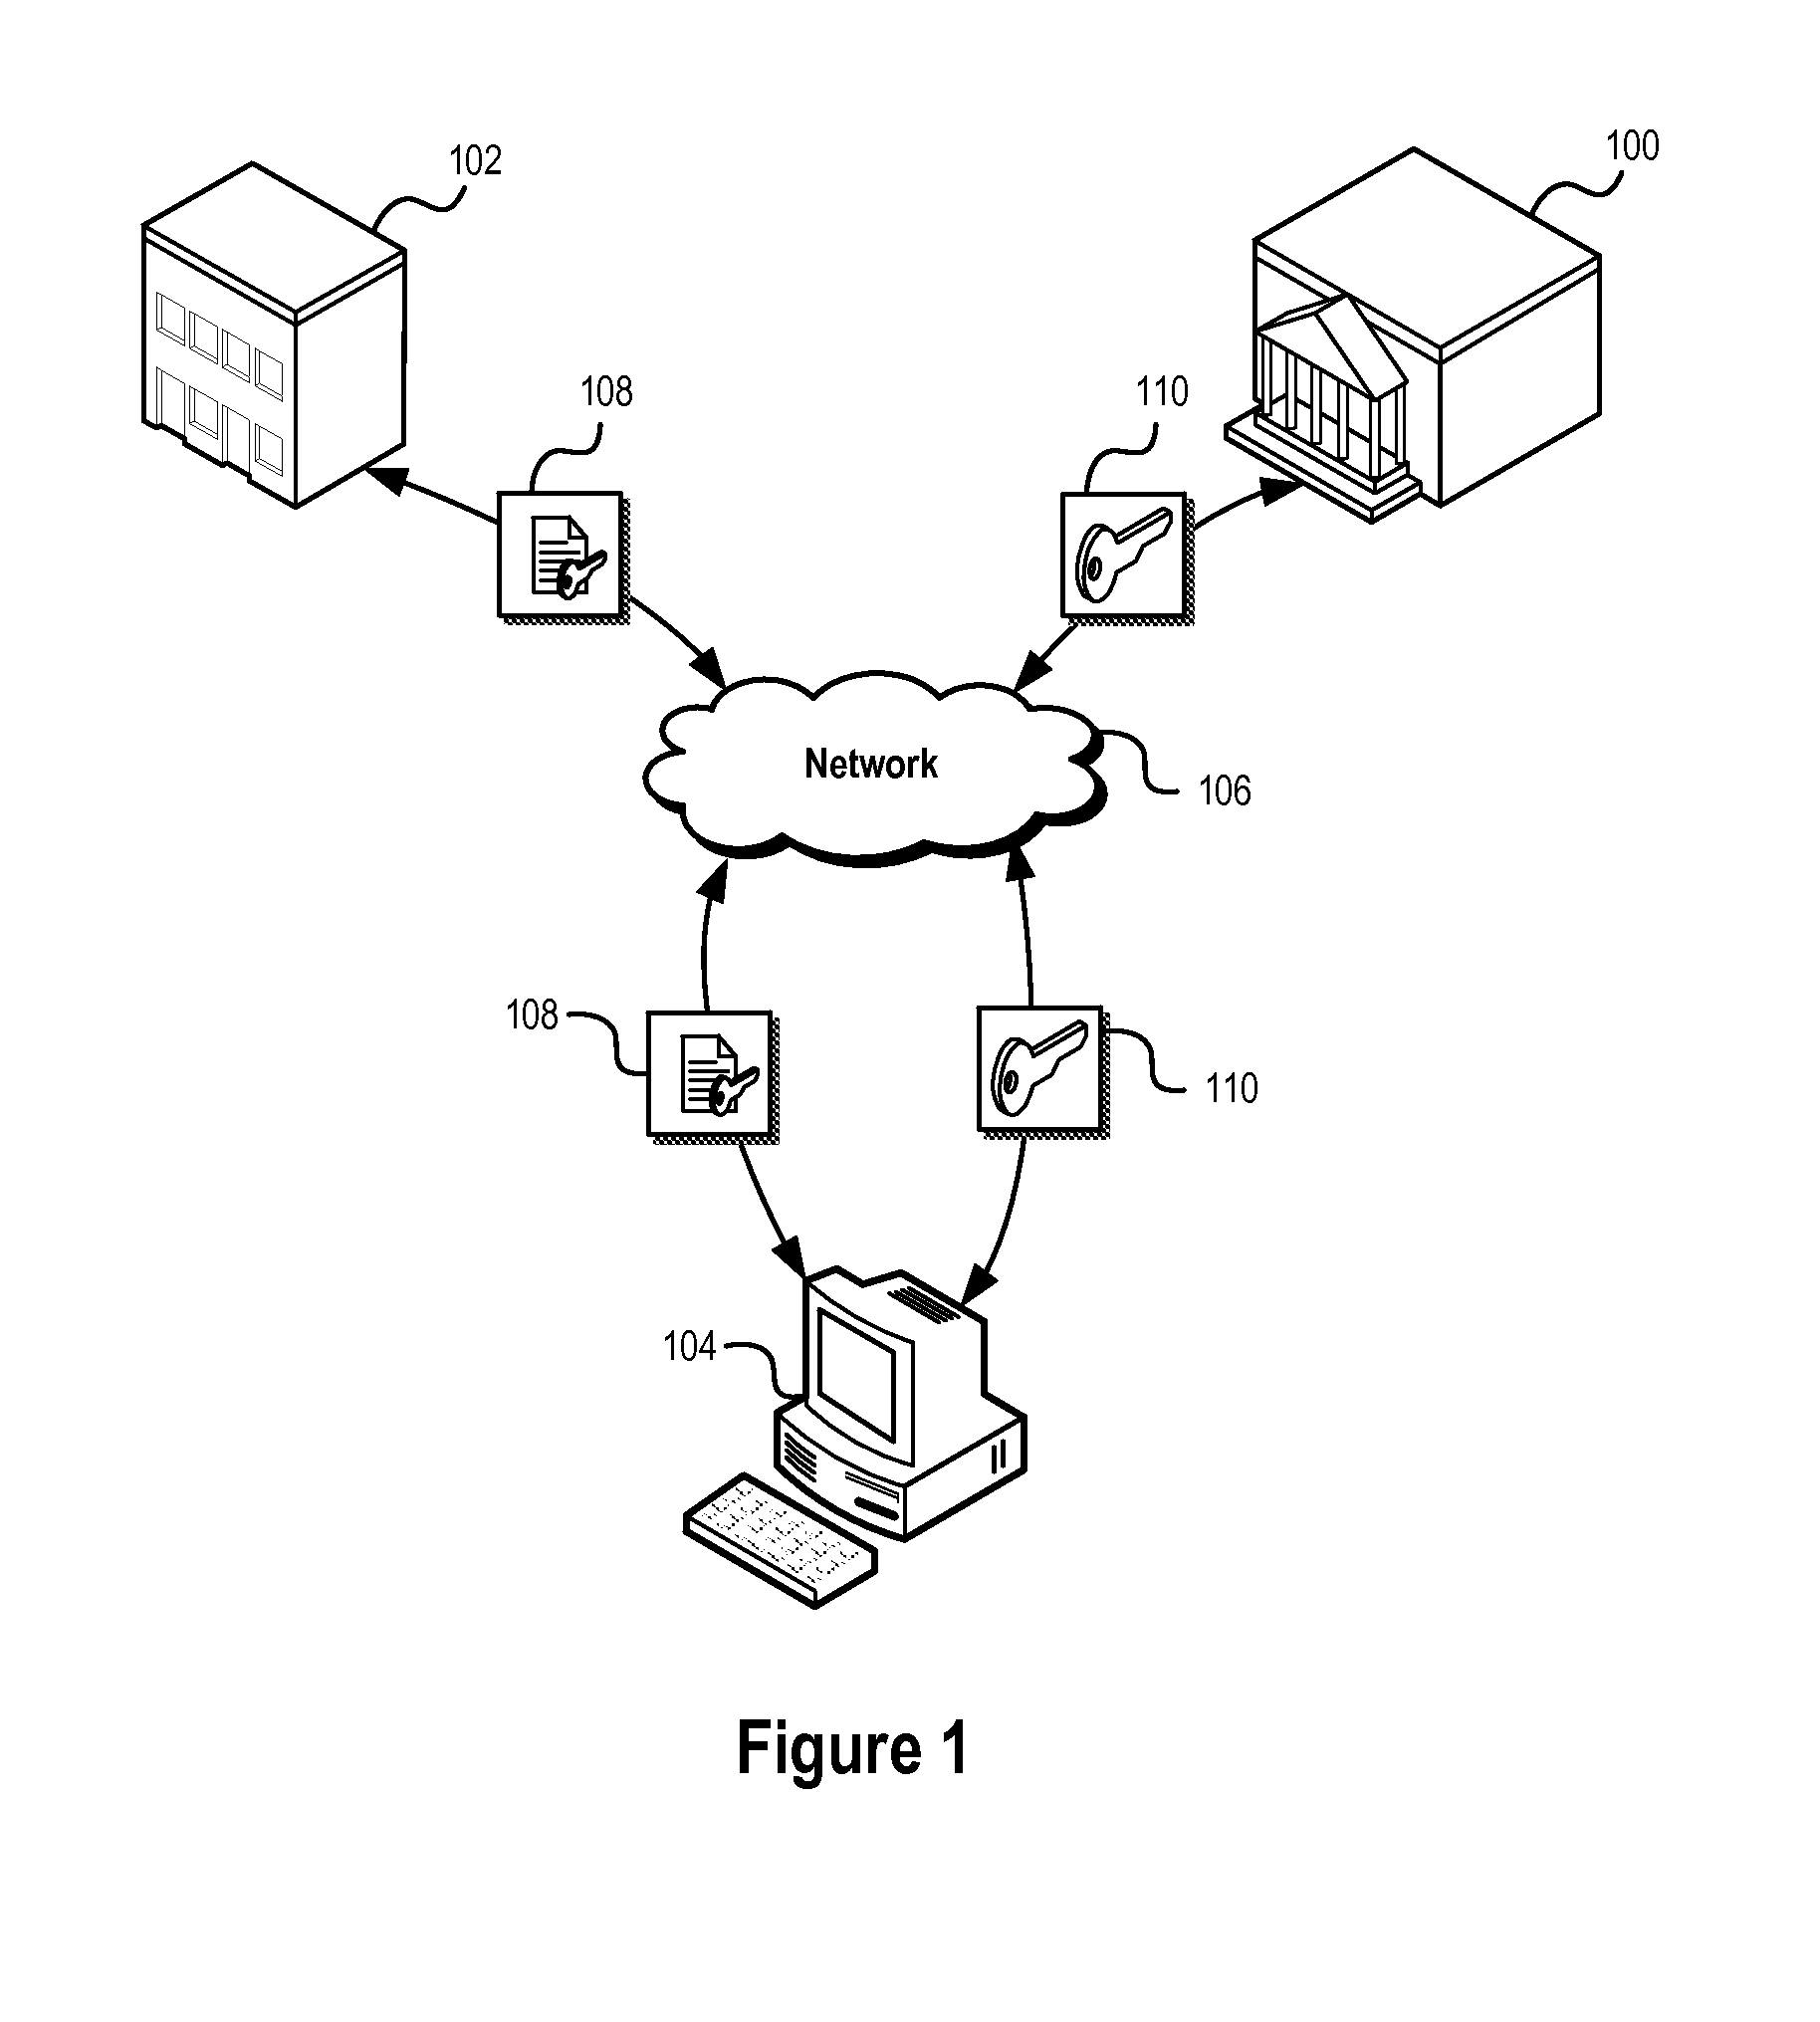 Systems and Methods for Managing Documents and Other Electronic Content